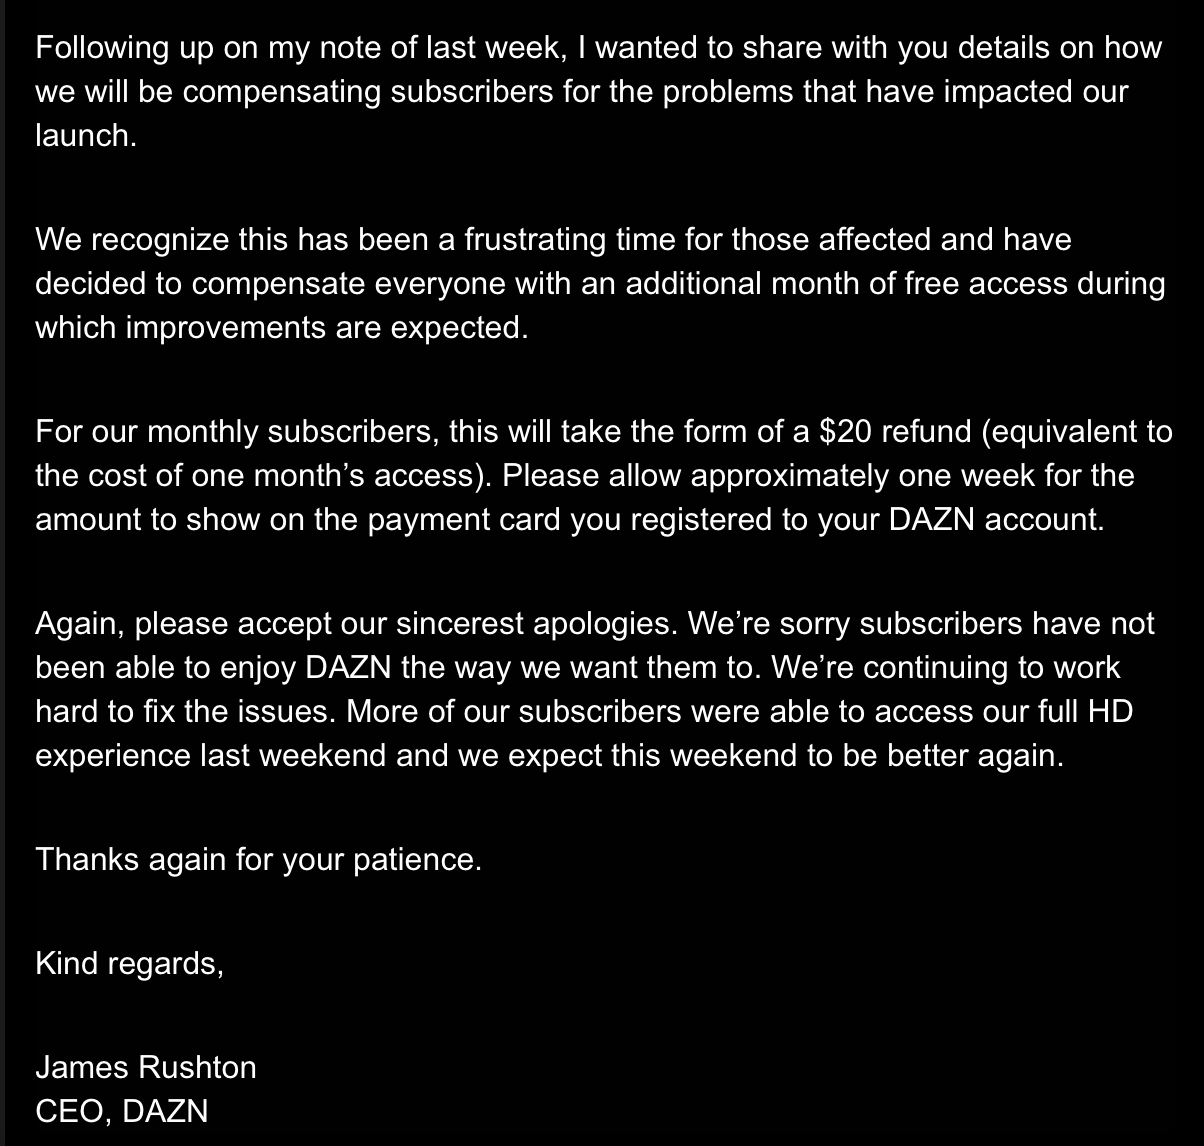 DAZN will give subscribers $20 refunds